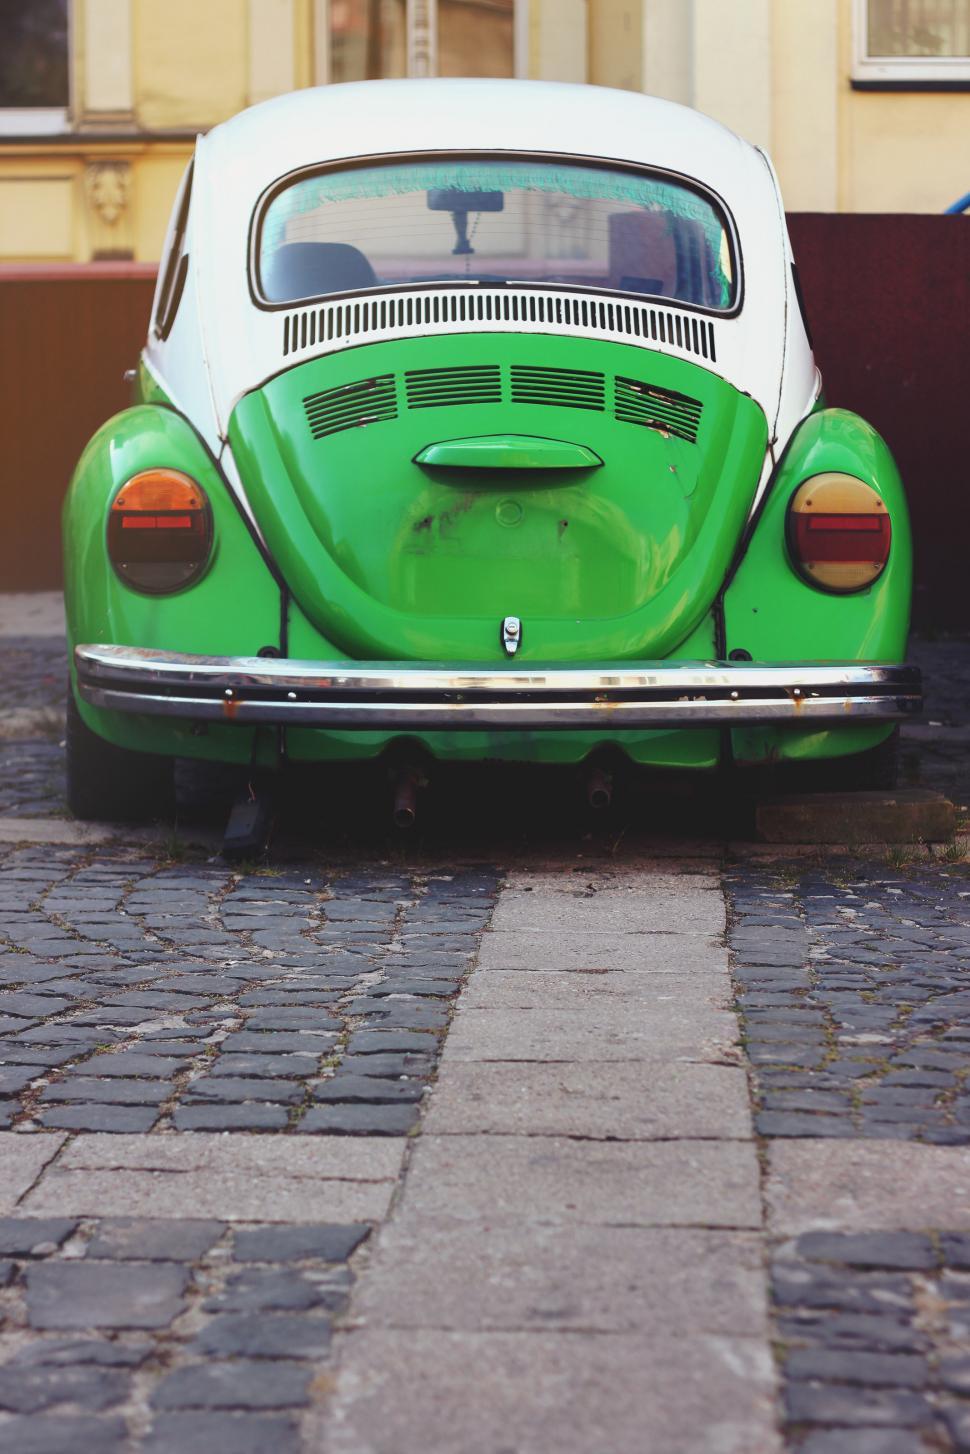 Free Image of Green and White Car Parked on Brick Road 